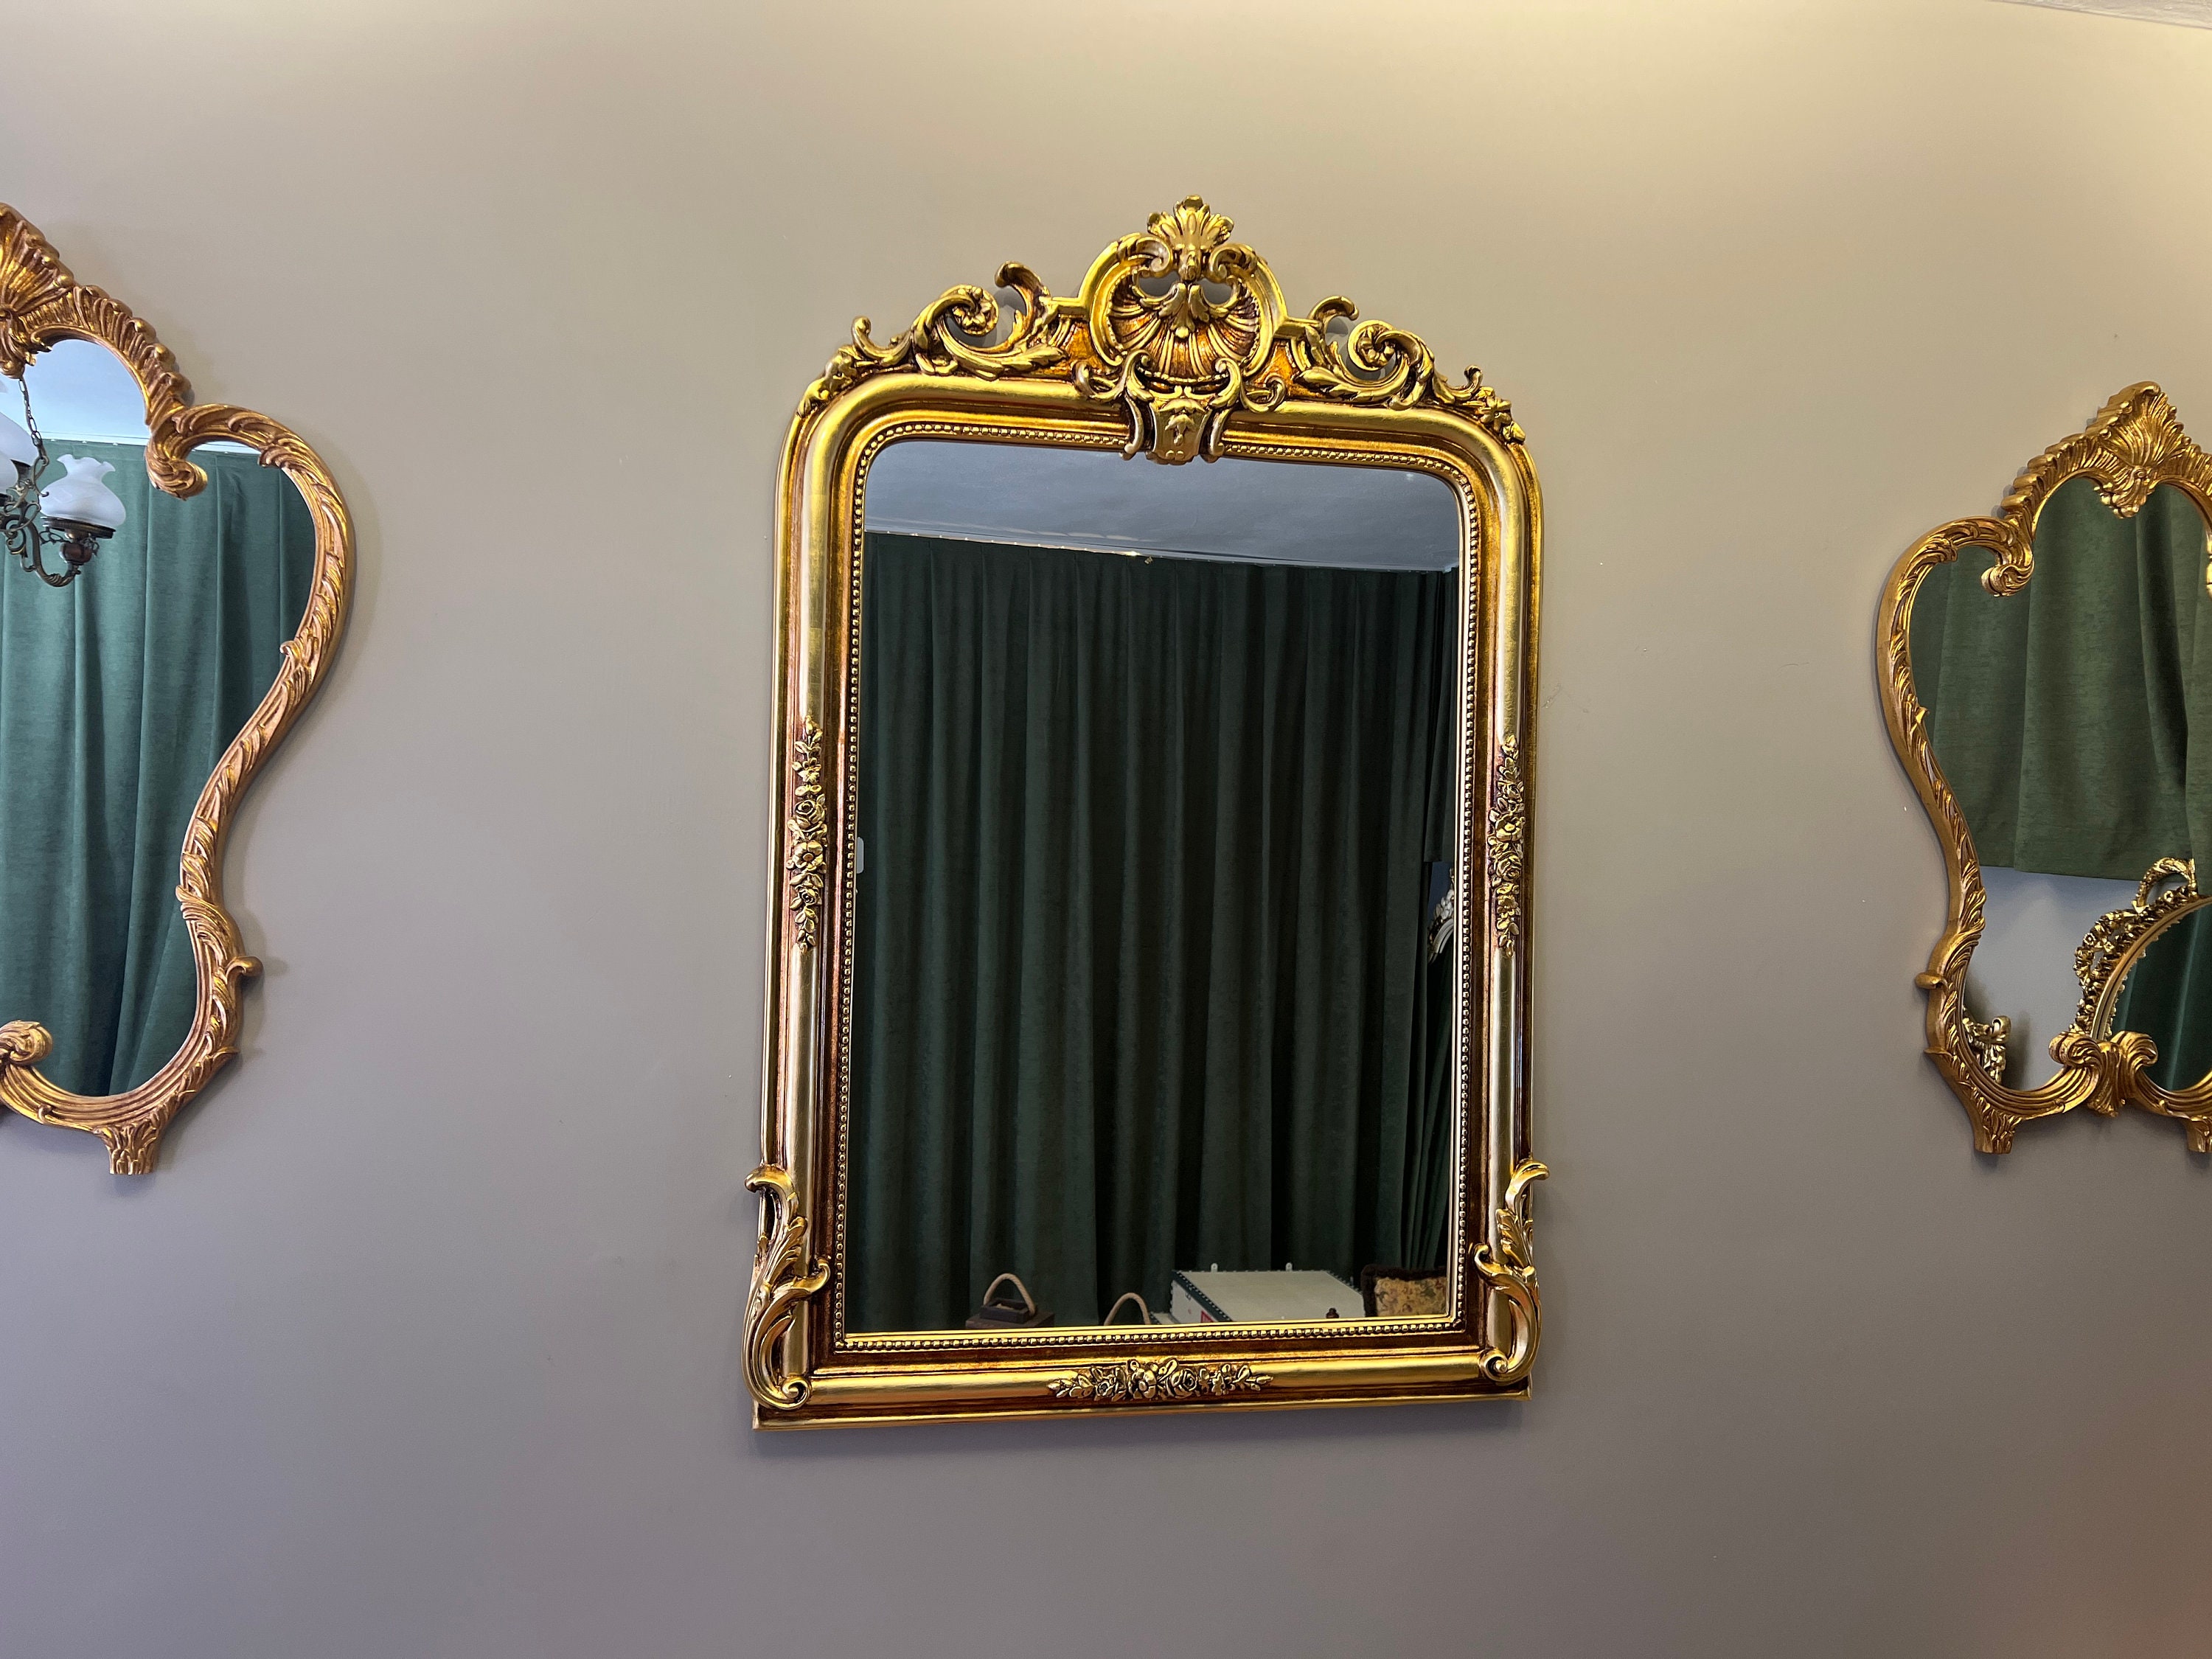 Vintage French Ruffled Bow Wooden Gilded Mirror 